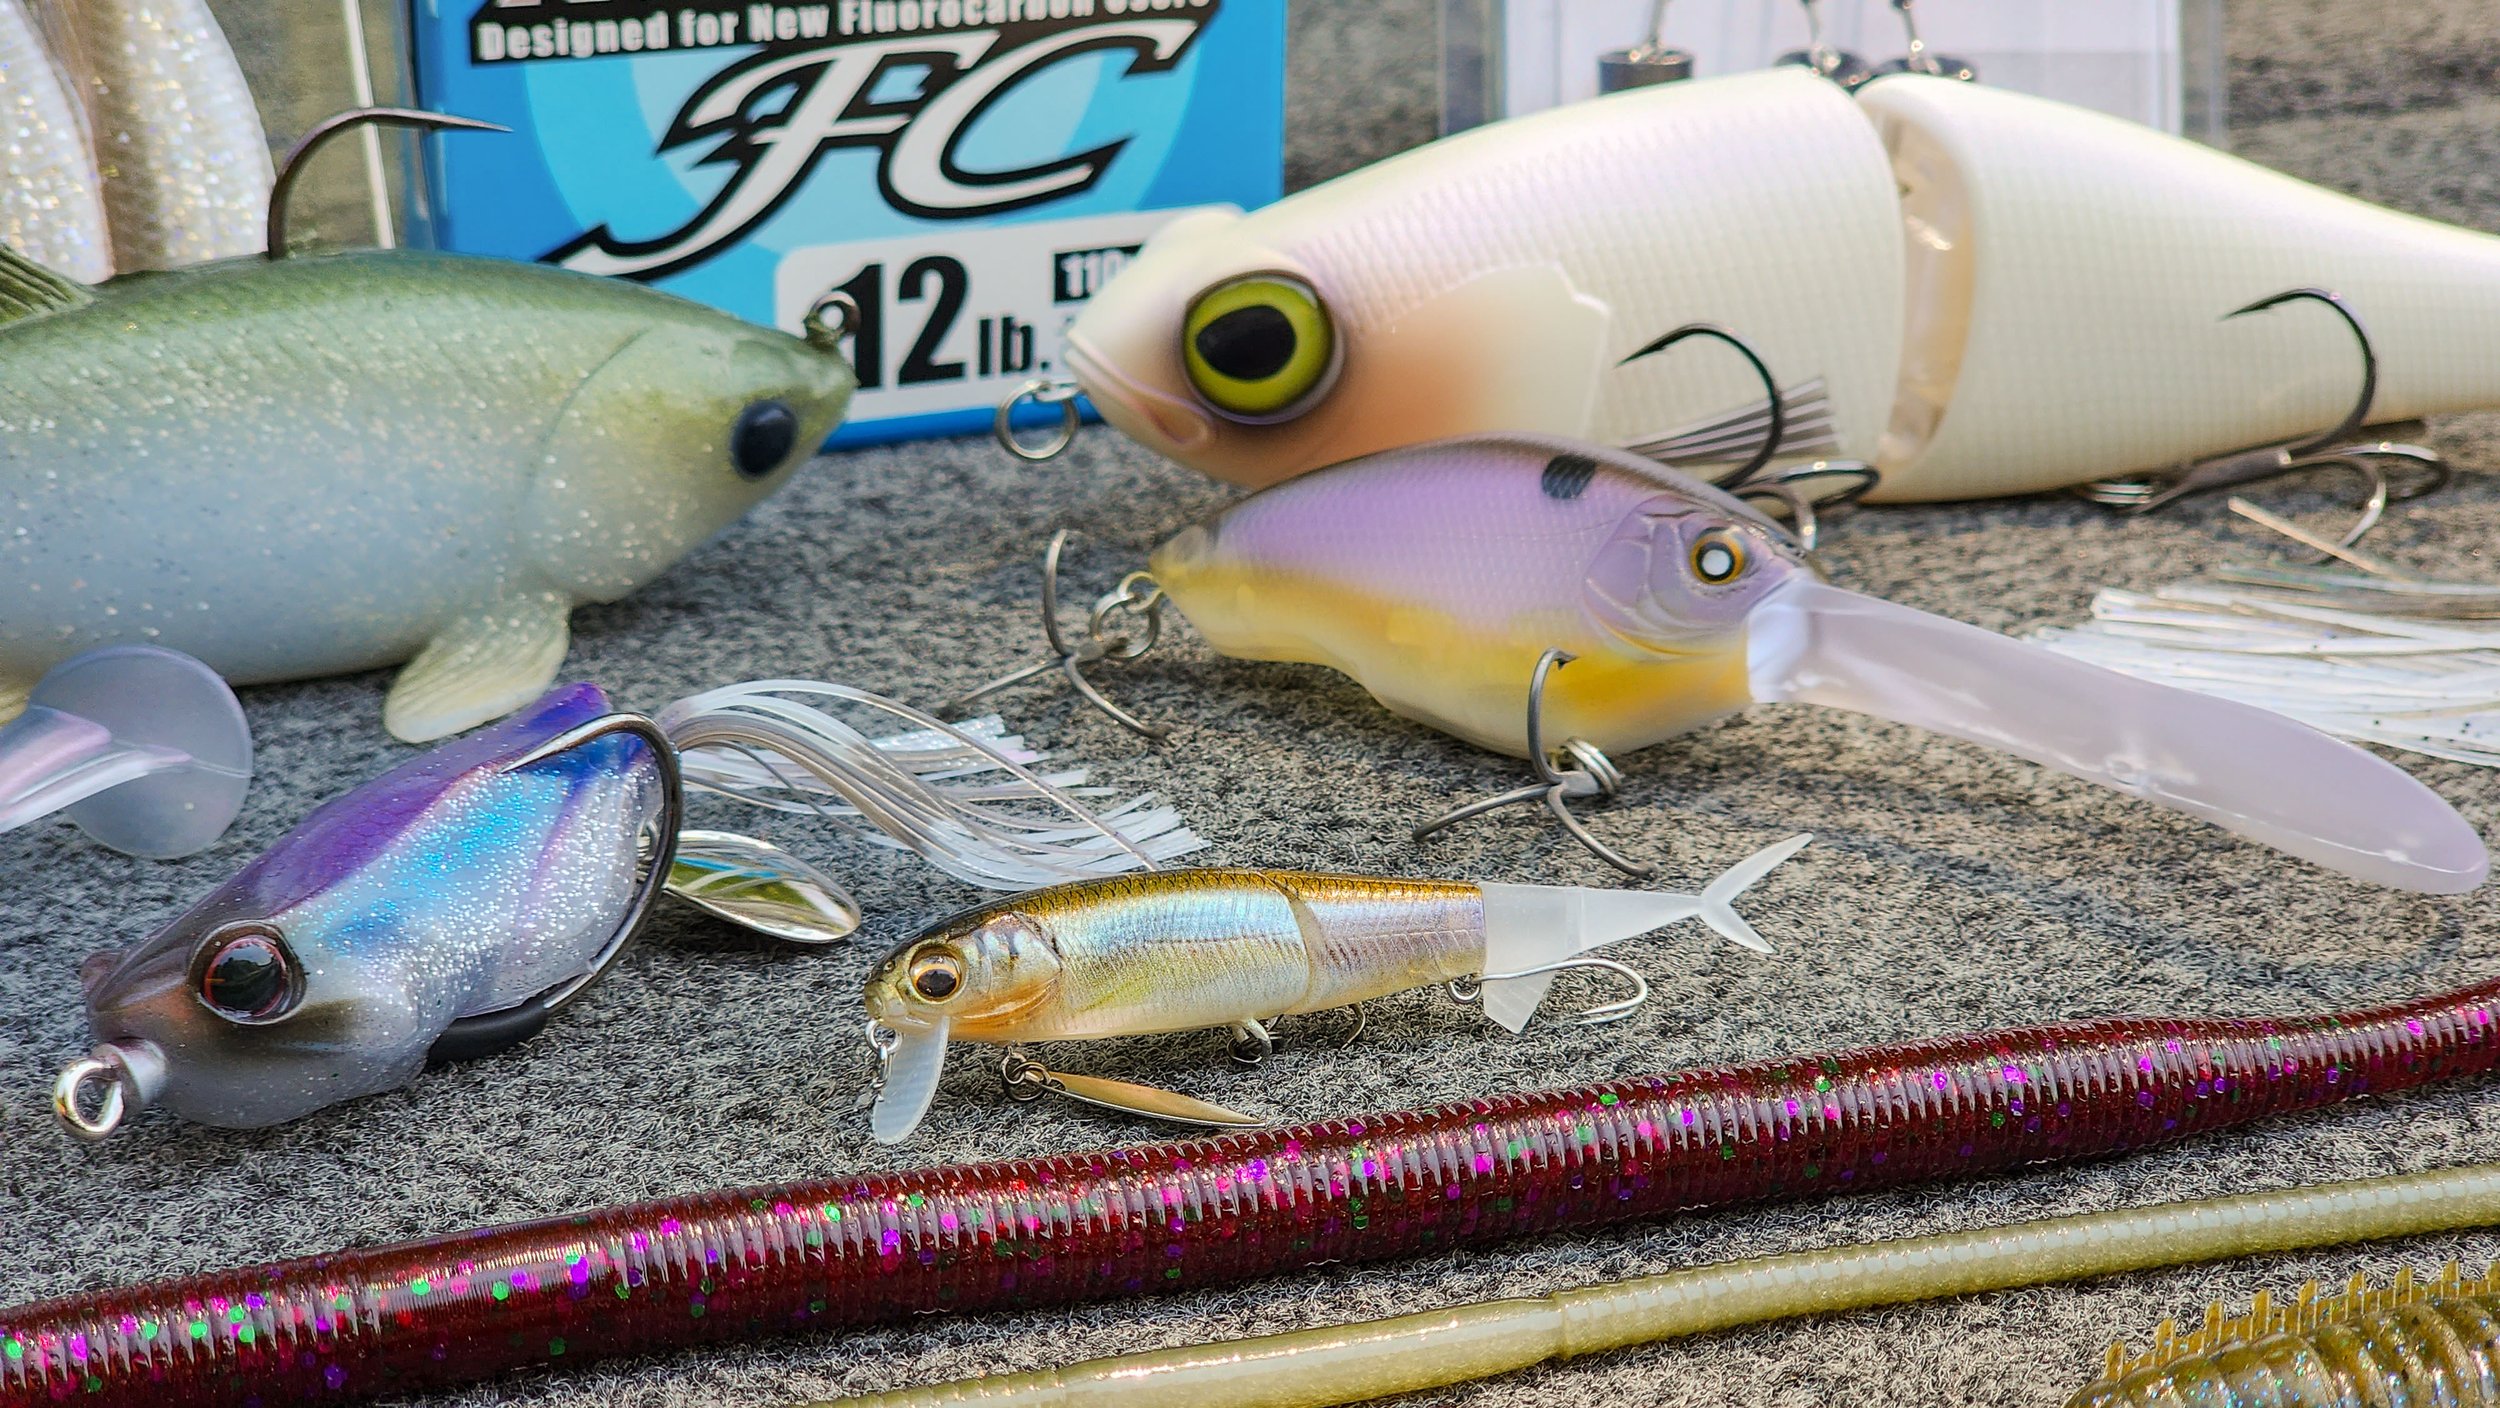 Summer Gear Review! Best Soft Baits, Hard Baits, And Tackle From